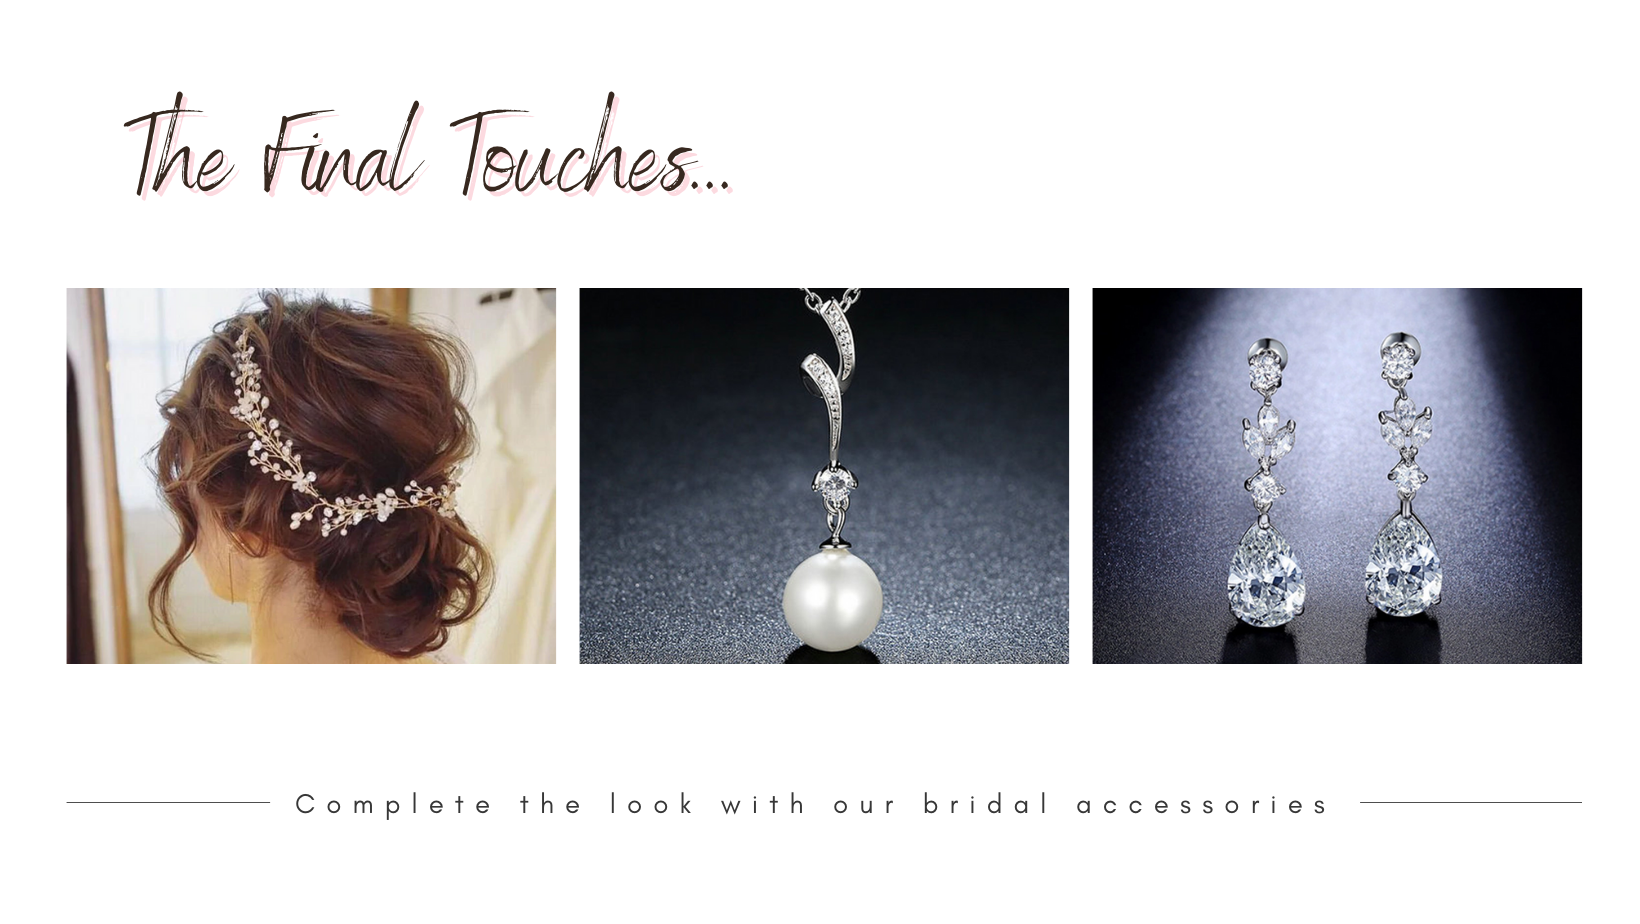 Bridal and Formal Jewellery Sets, Headpieces, Earrings, Necklaces, Bracelets and Rings at Fashionably Yours